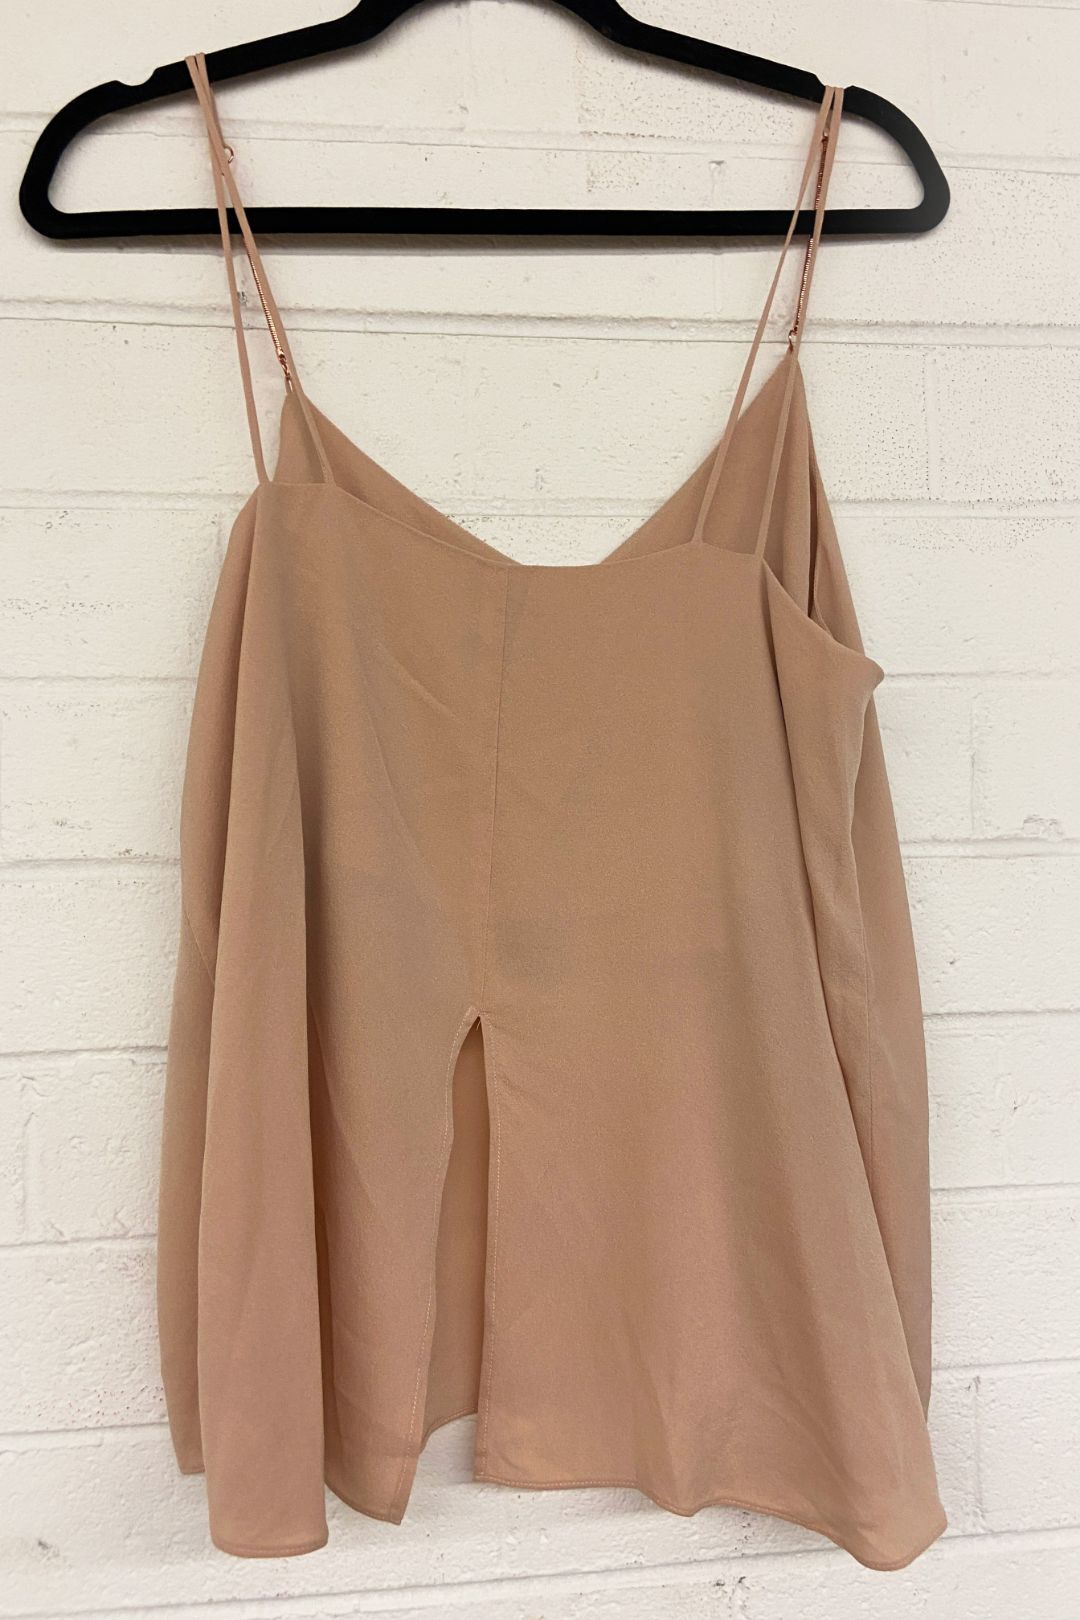 Ginger and Smart Silk Blush Cami with Rose Gold Chain Straps